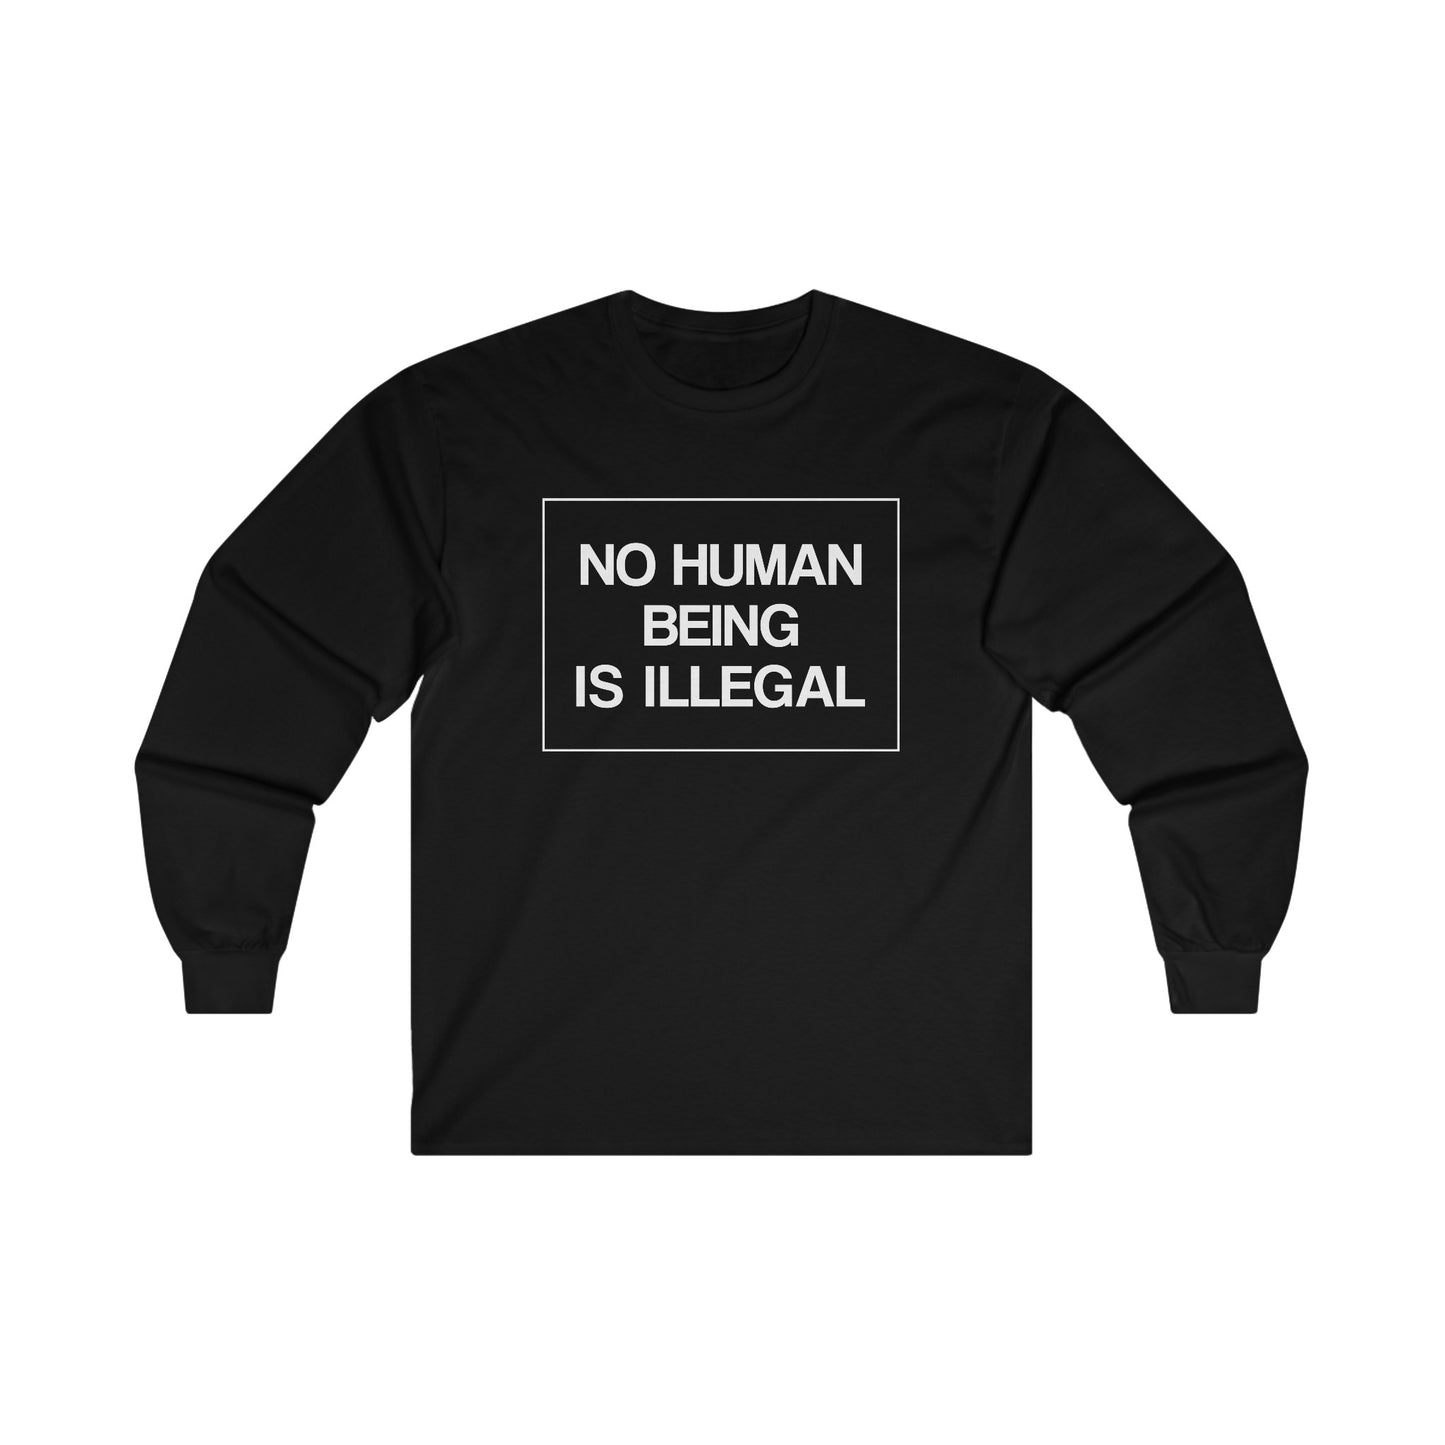 “No Human Being is Illegal” Unisex Long Sleeve T-Shirt